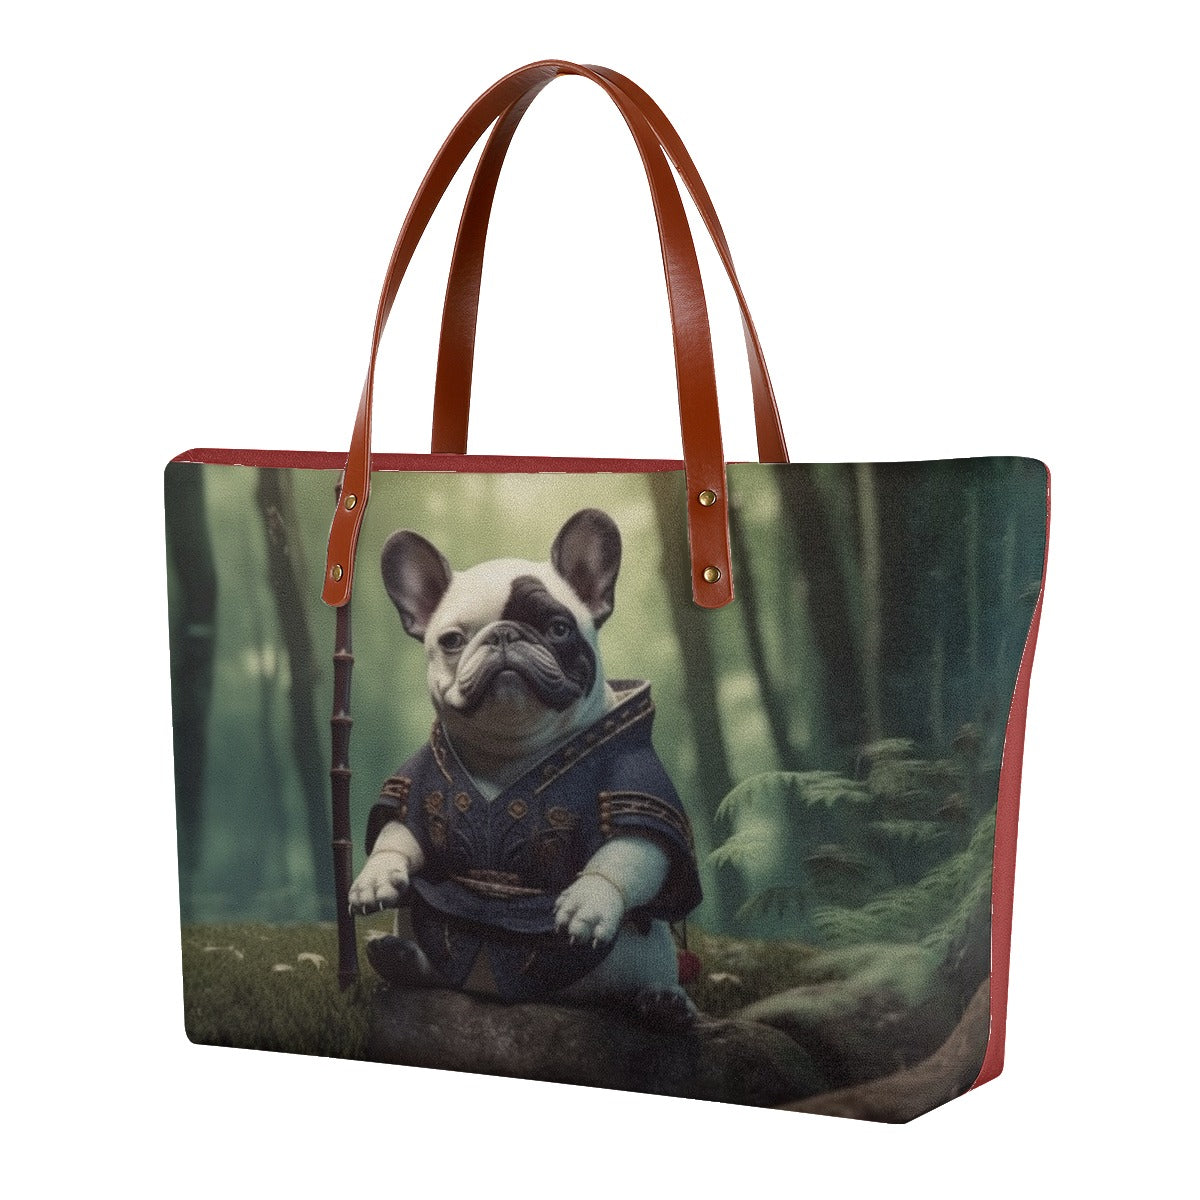 Panda Frenchie Women's Tote Bag - Chic and Capacious Choice for Frenchie Lovers